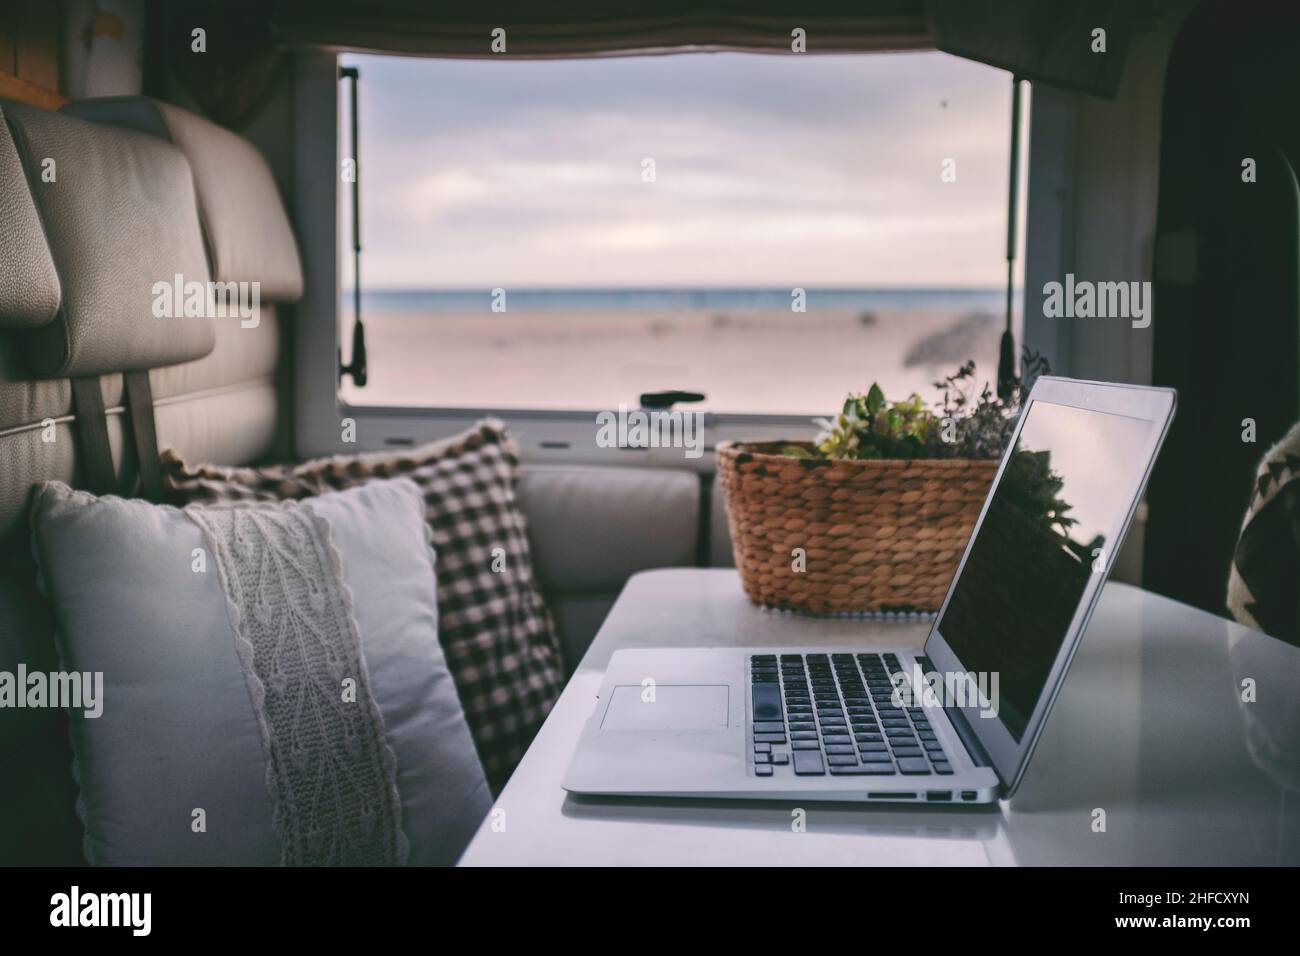 Remote onilne work and smart working travel concept with laptop computer inside a van camper interior with beach view. Freedom from office modern life Stock Photo